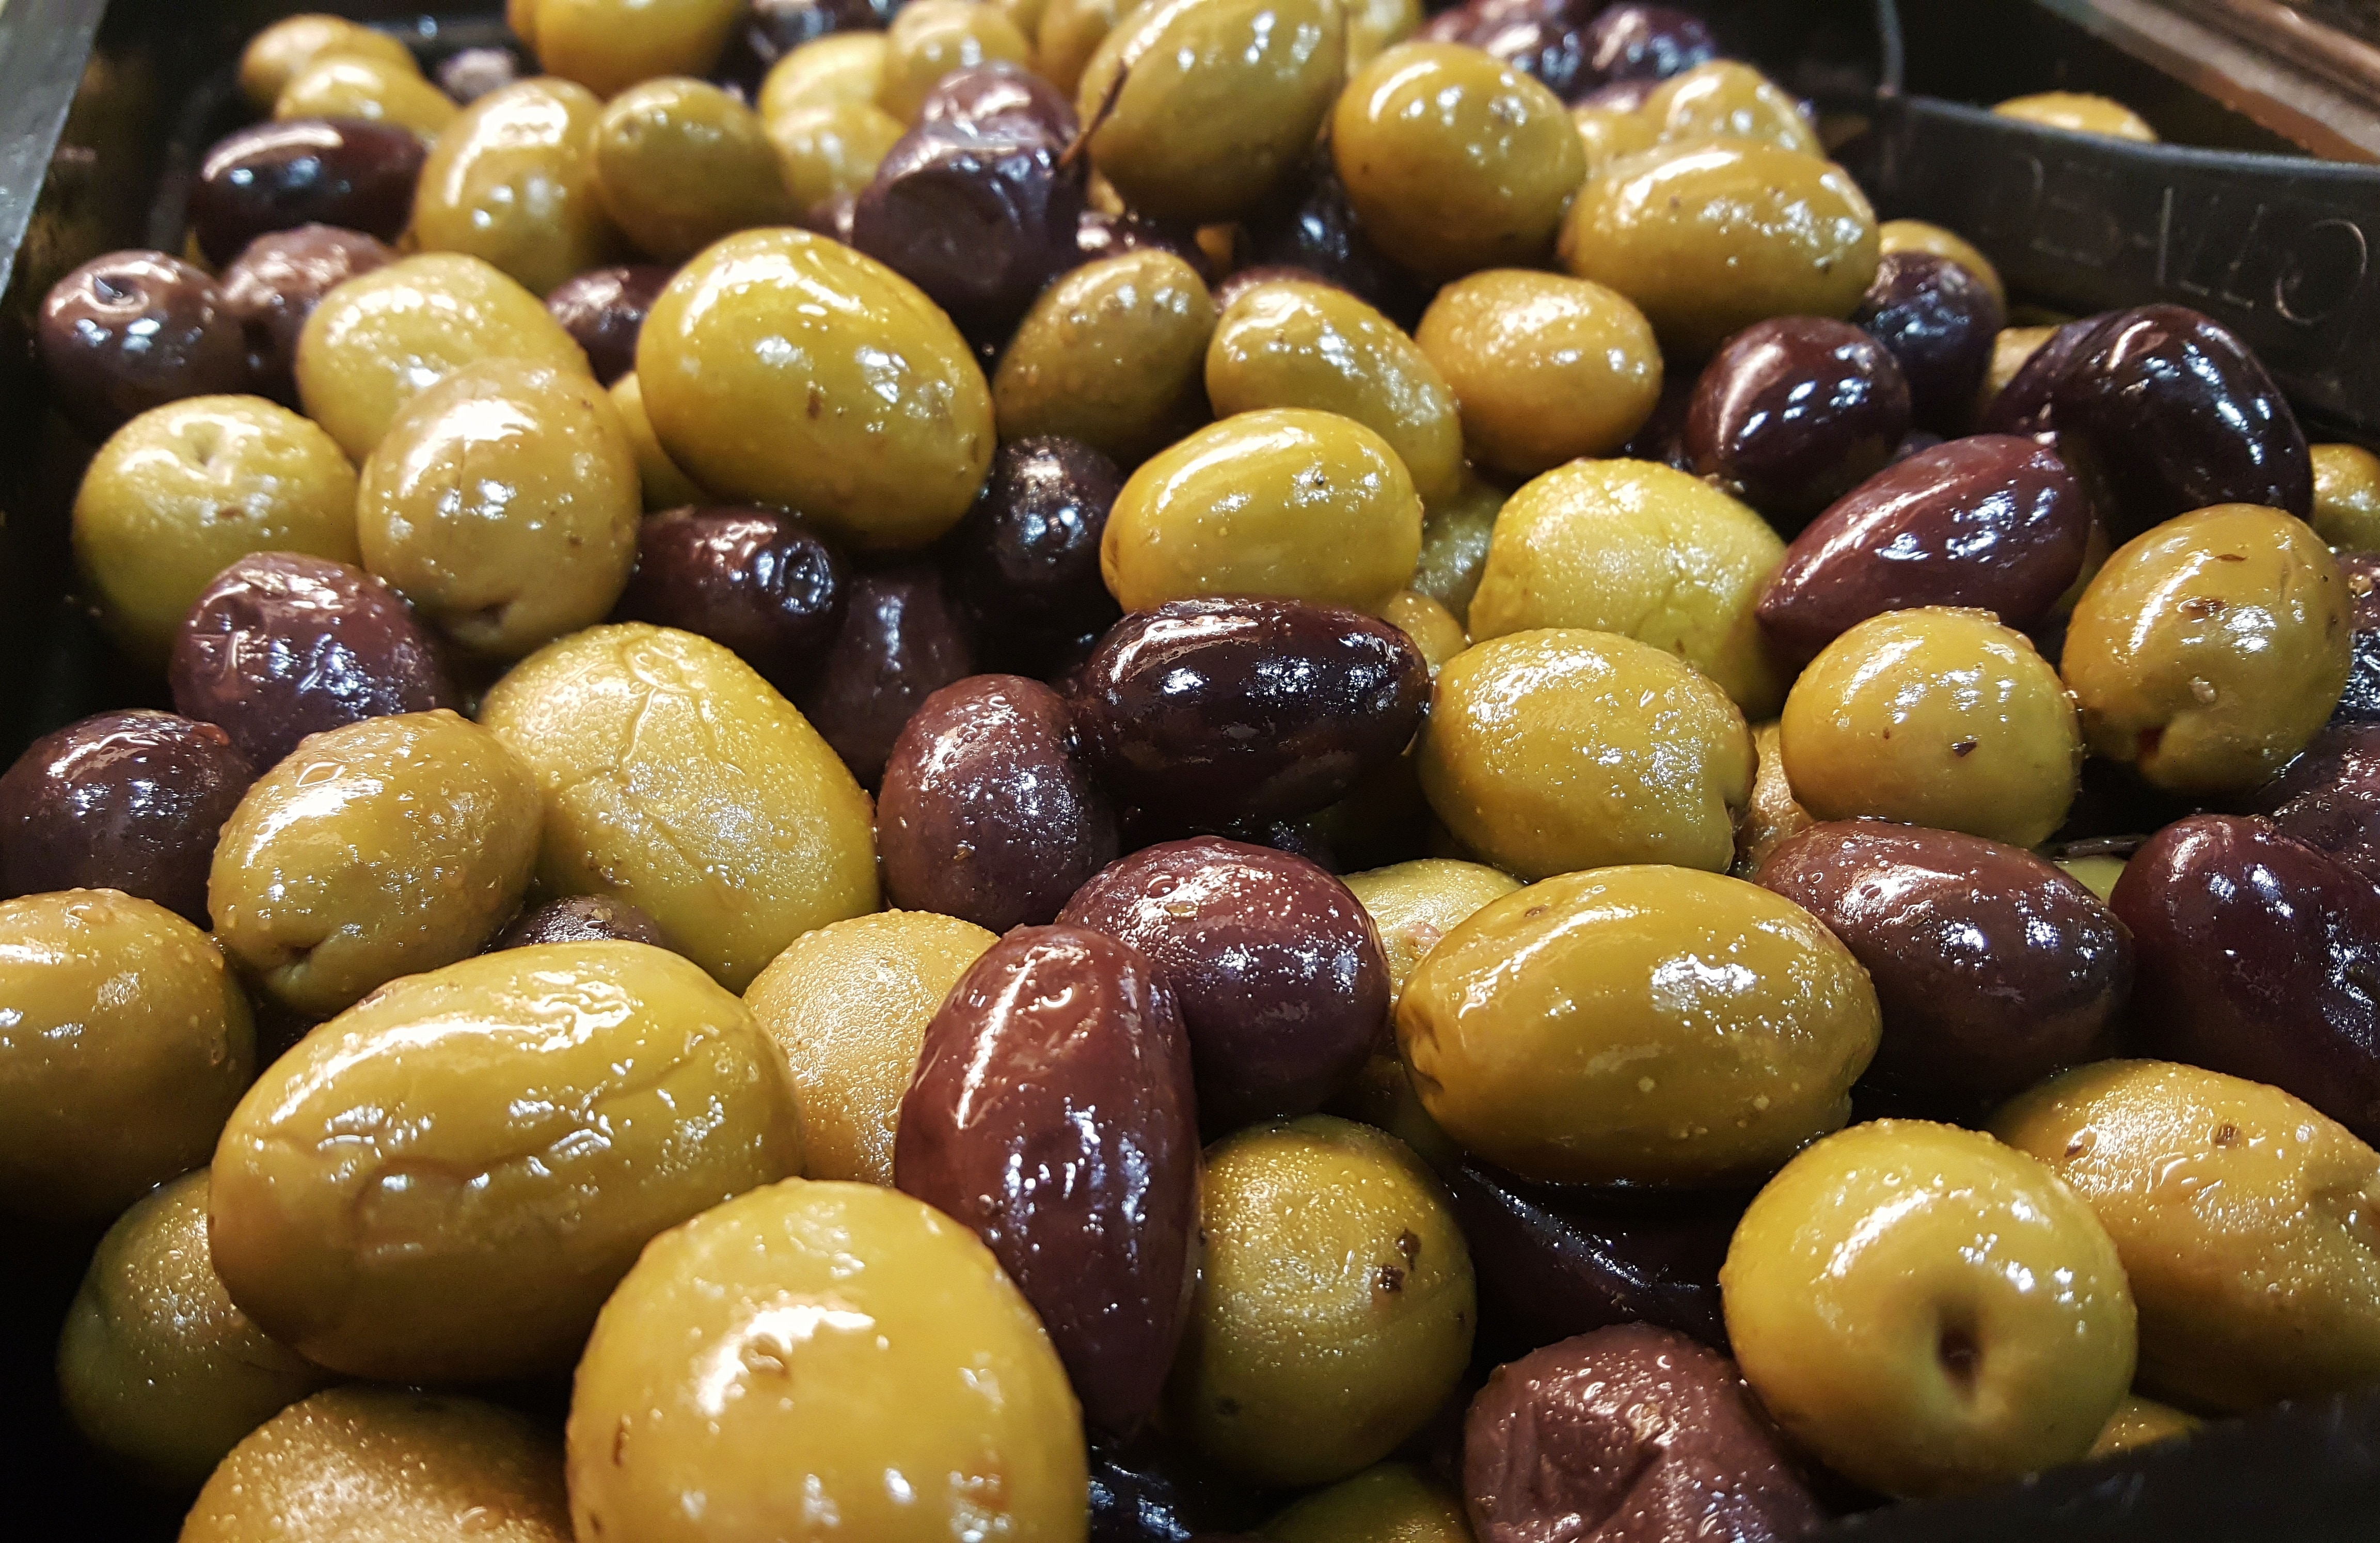 brown and yellow fruits